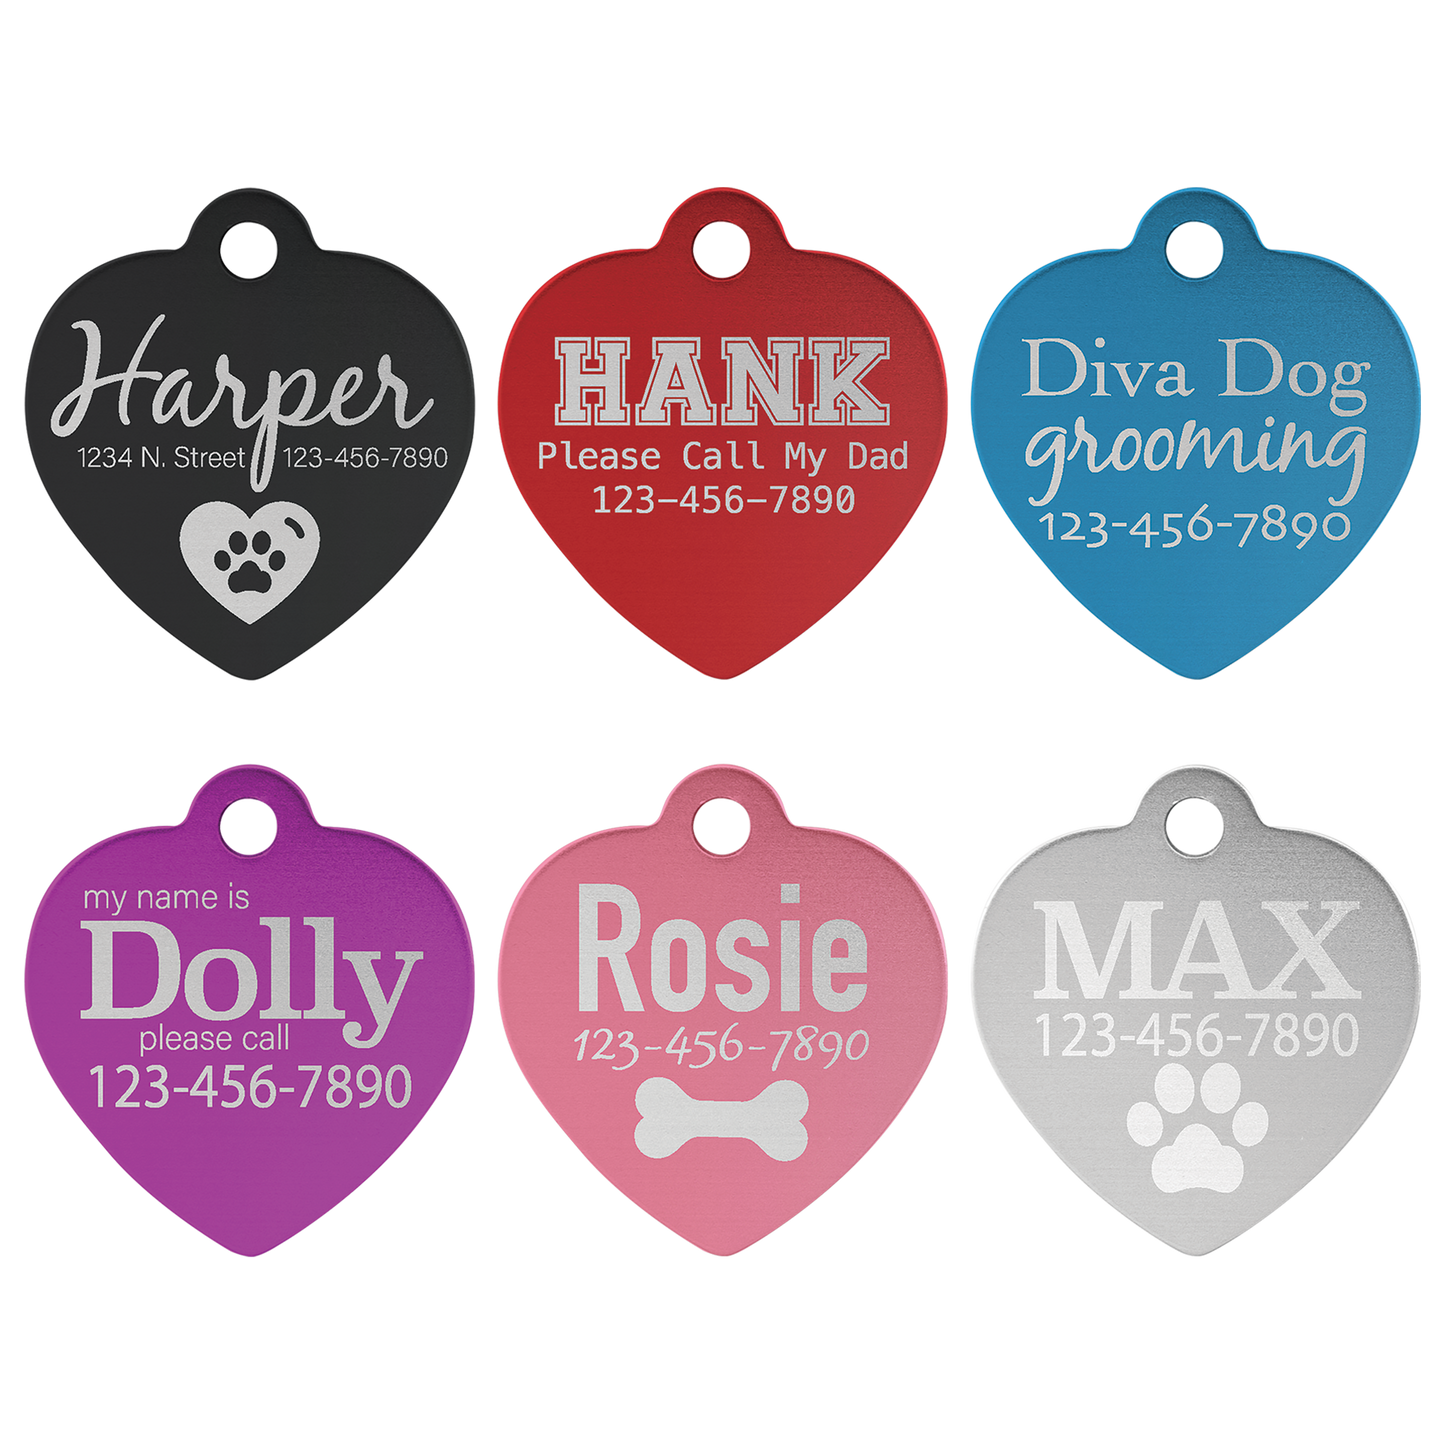 B.O.G.O. SMALL 1" x 1" Pink Laserable Anodized Aluminum Heart Pet Tag